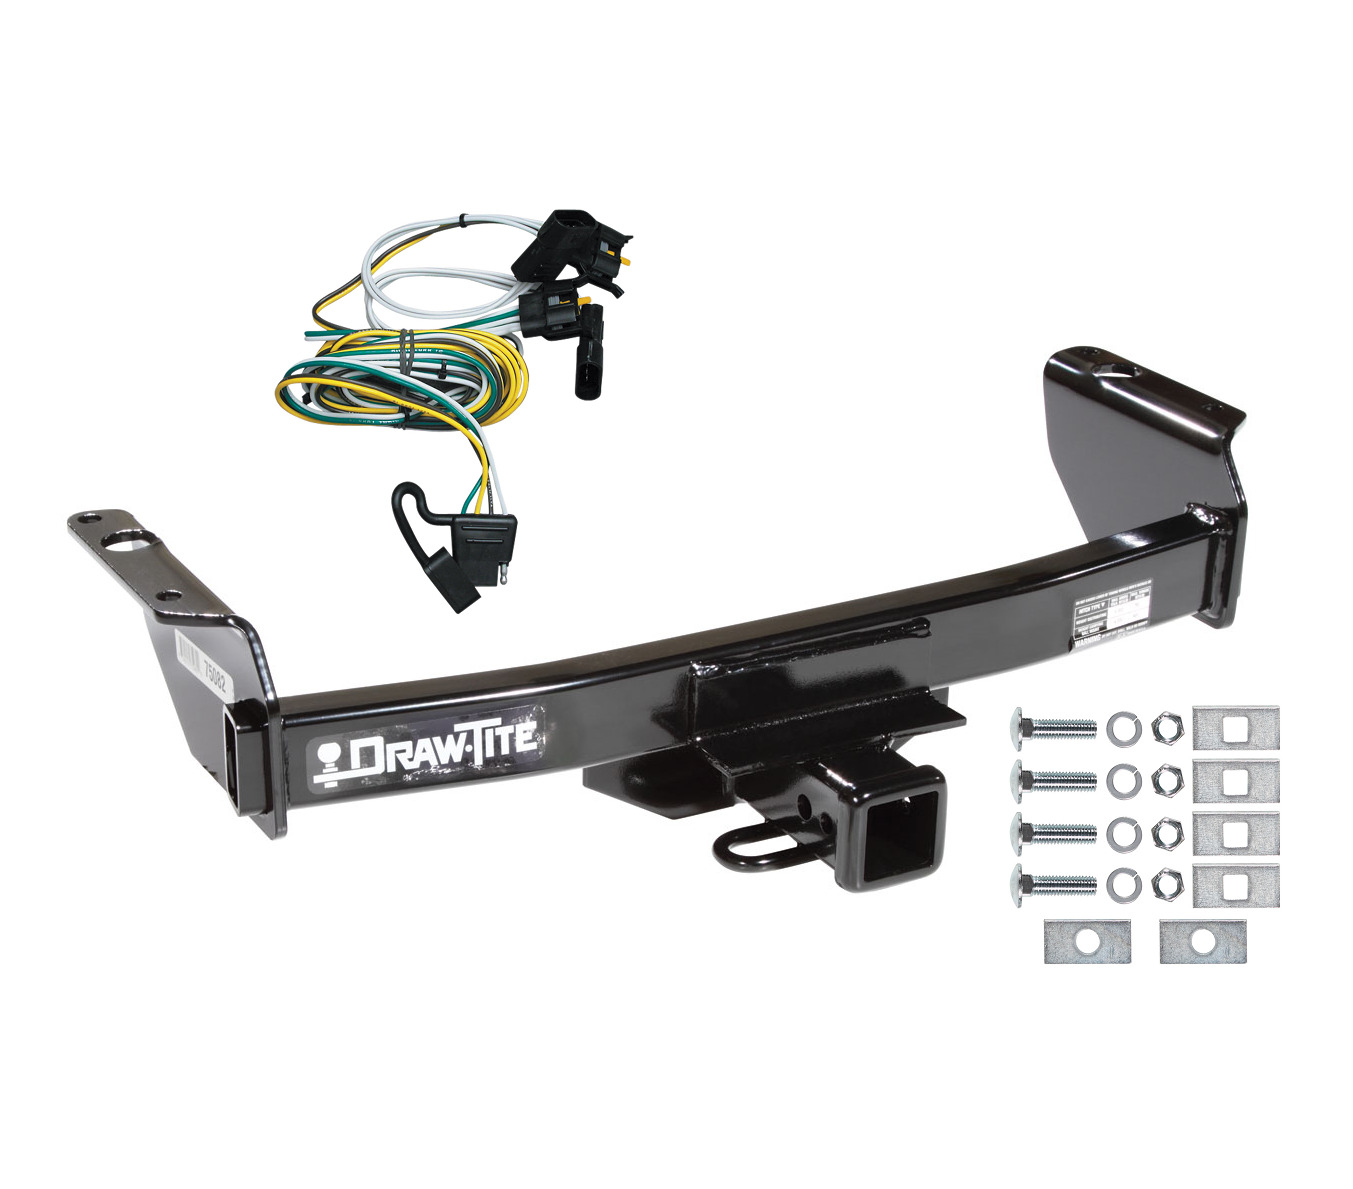 Trailer Tow Hitch For 00-03 Ford Ranger All Styles Receiver w/ Wiring Harness